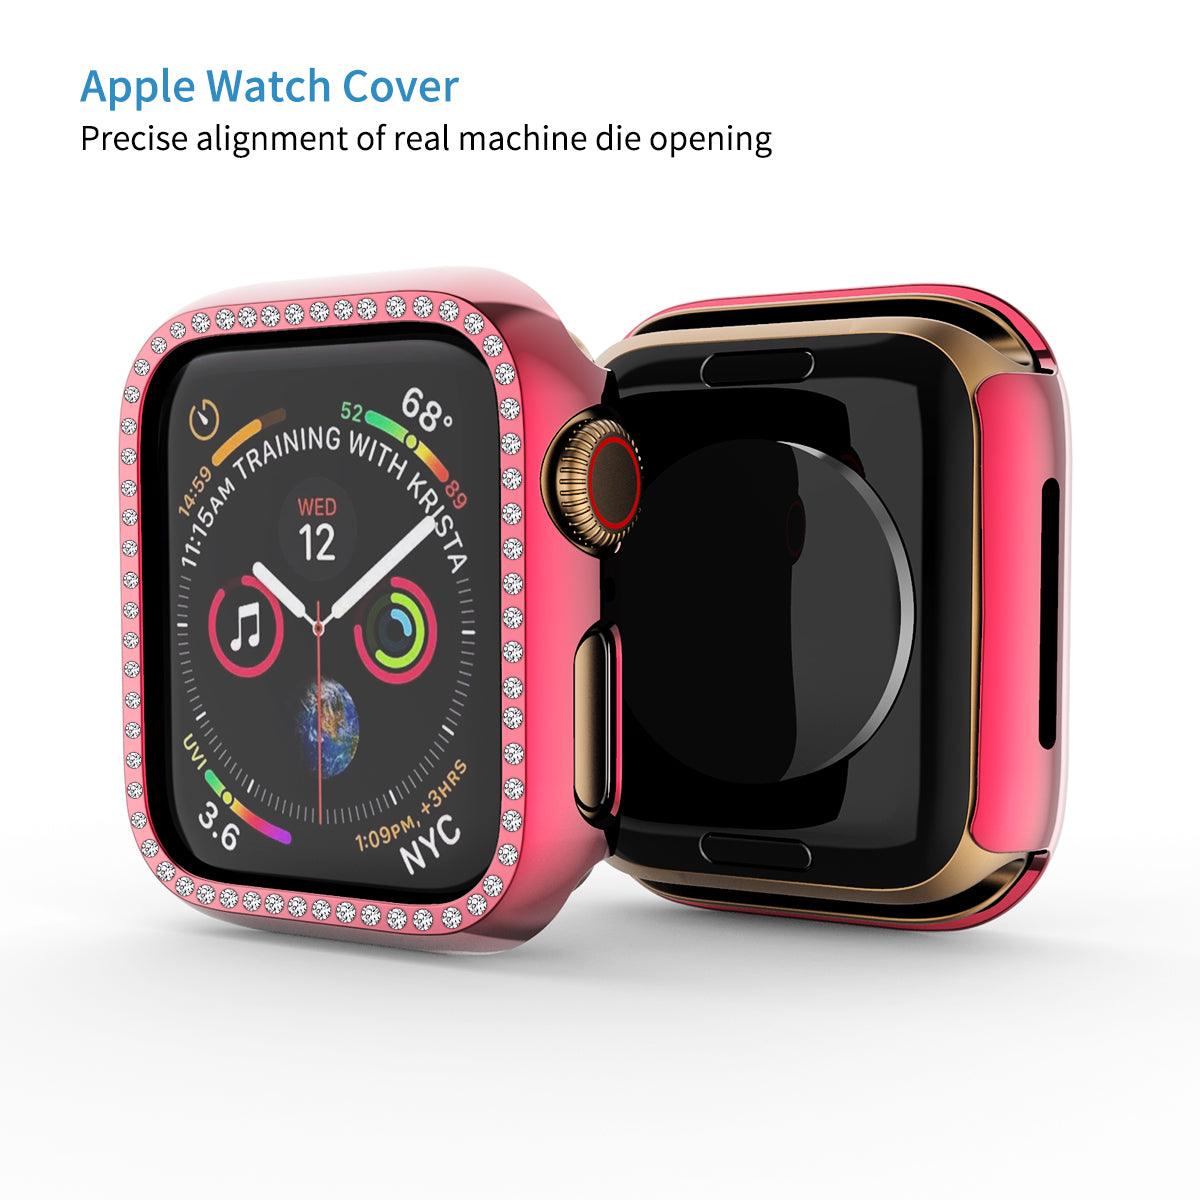 Bling Case For Apple Watch Multiple Colors Available - Fancy Bands 